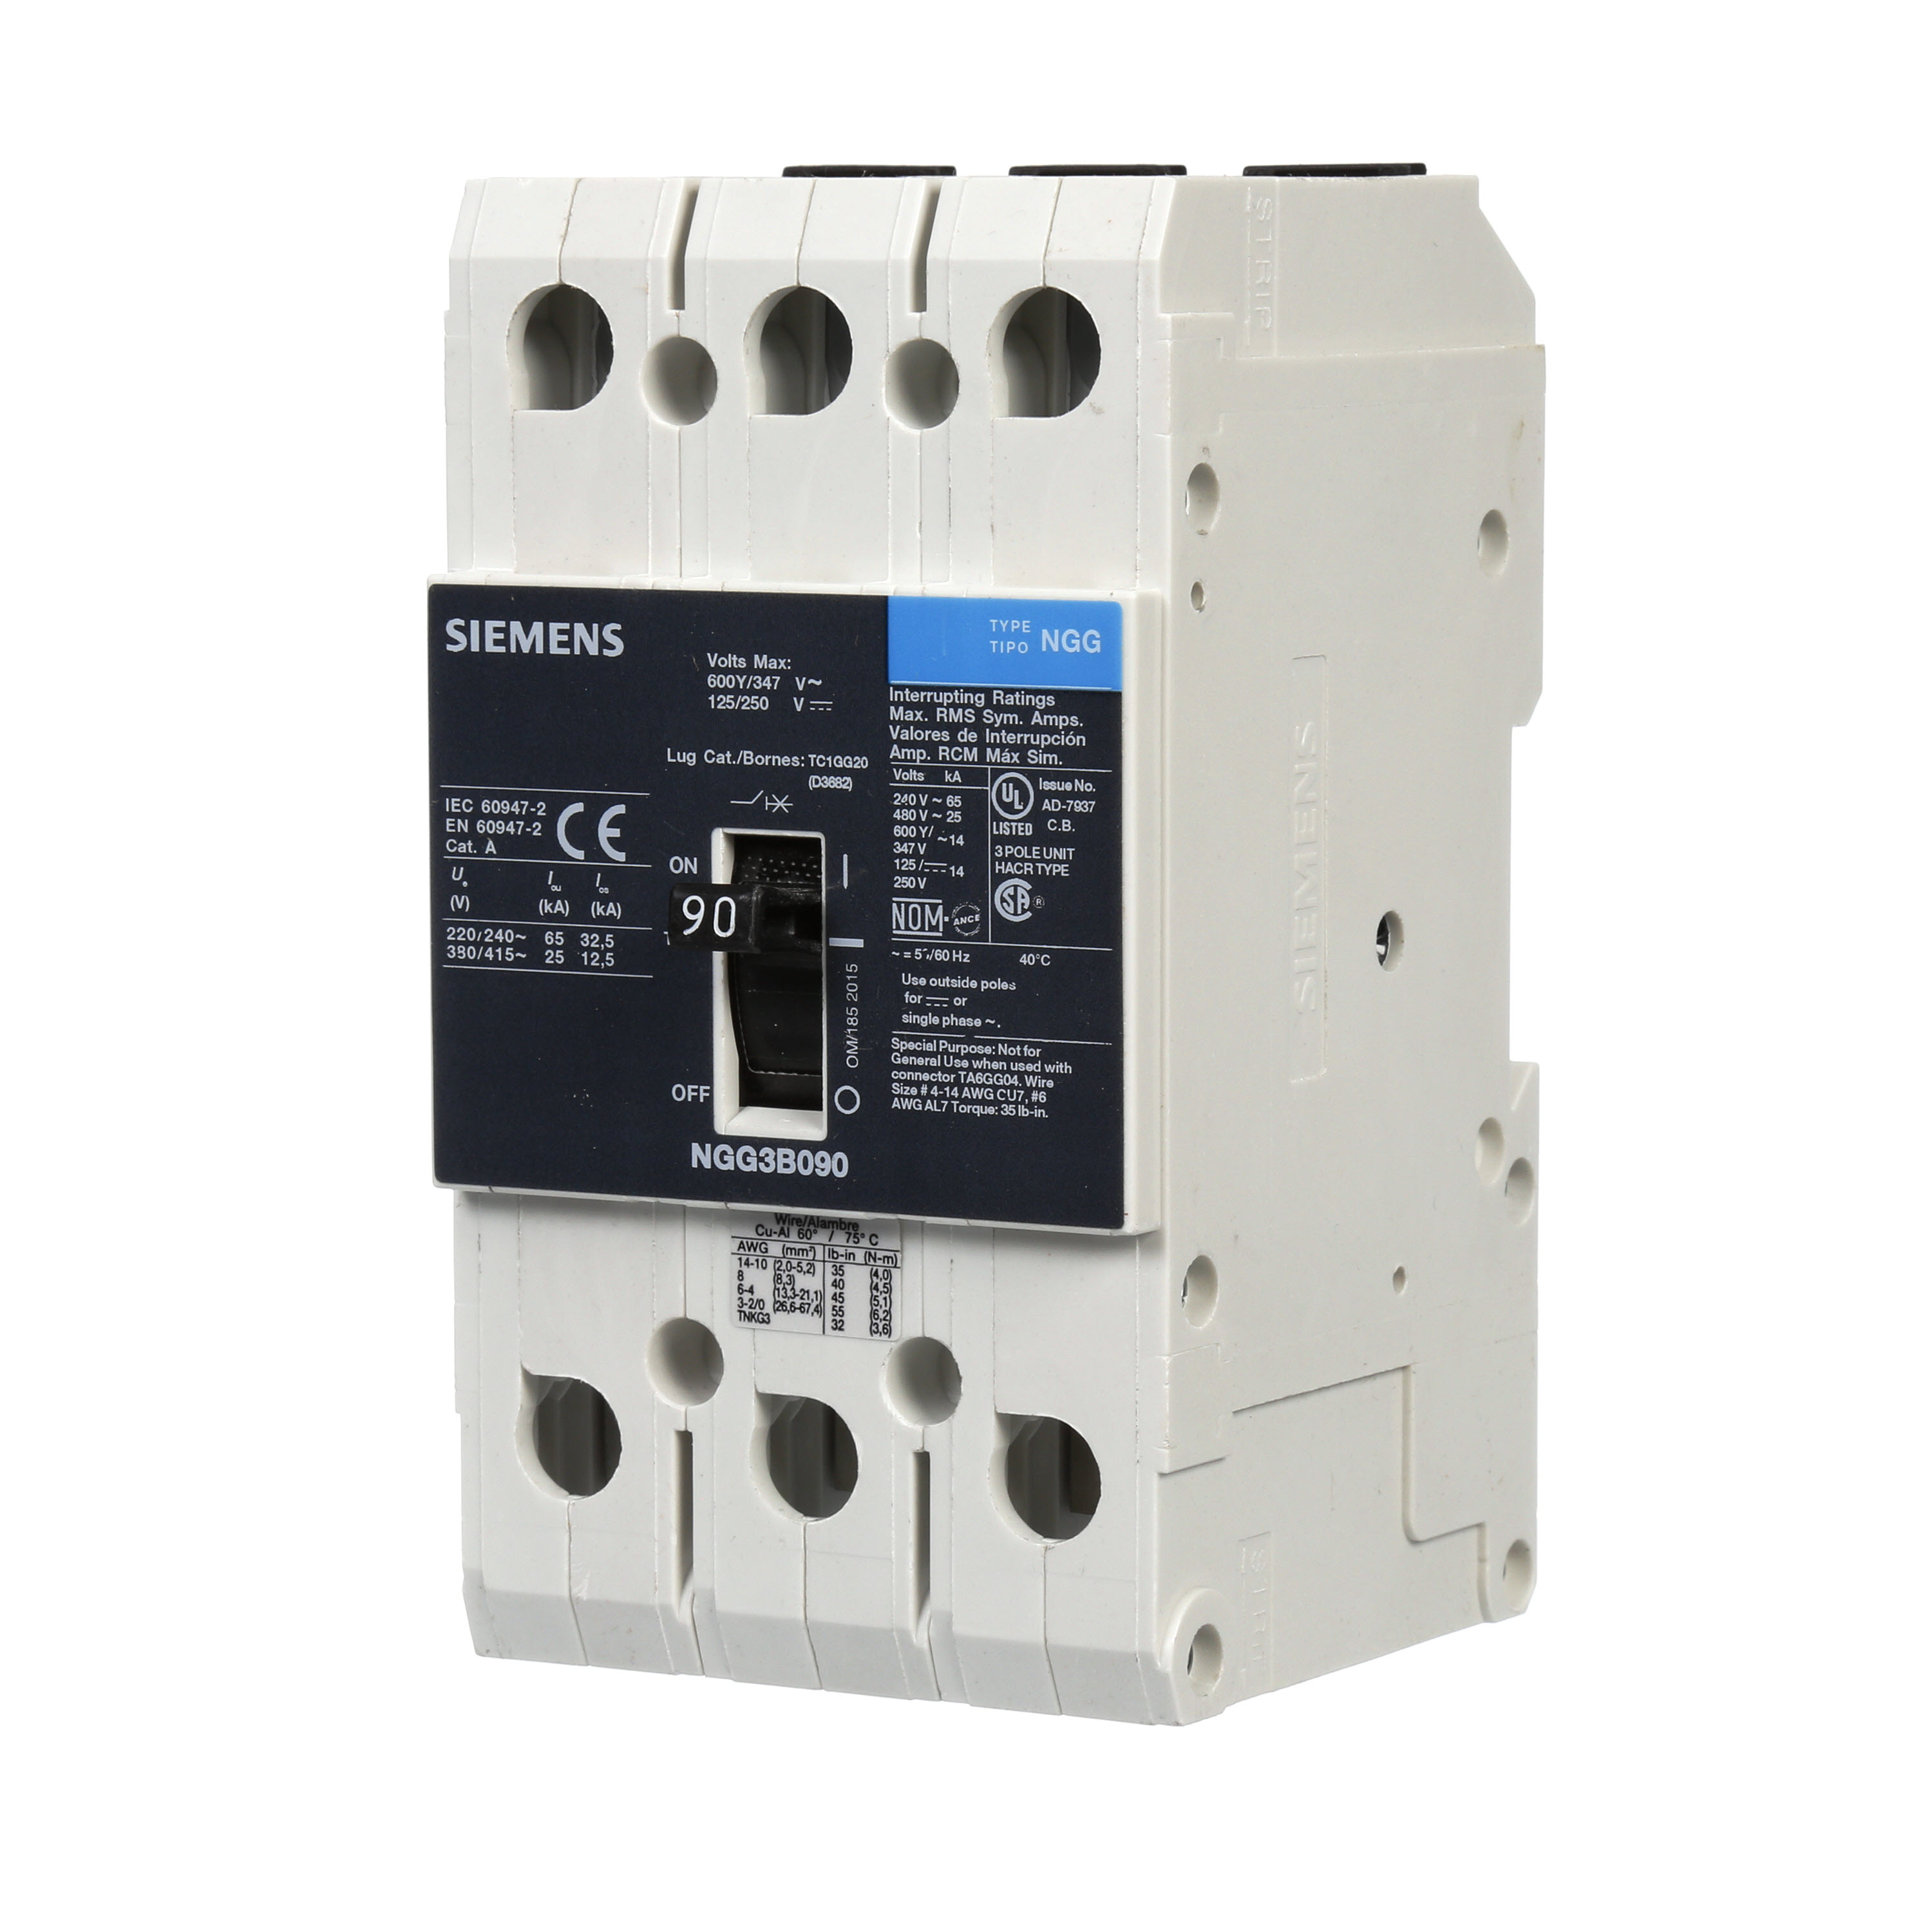 SIEMENS LOW VOLTAGE G FRAME CIRCUIT BREAKER WITH THERMAL - MAGNETIC TRIP. UL LISTED NGG FRAME WITH STANDARD BREAKING CAPACITY. 90A 3-POLE (14KAIC AT 600Y/347V)(25KAIC AT 480V). SPECIAL FEATURES MOUNTS ON DIN RAIL / SCREW, LINE AND LOAD SIDE LUGS (TC1GG20) WIRE RANGE 8 - 1/0 AWS (CU/AL). DIMENSIONS (W x H x D) IN 3 x 5.4 x 2.8.